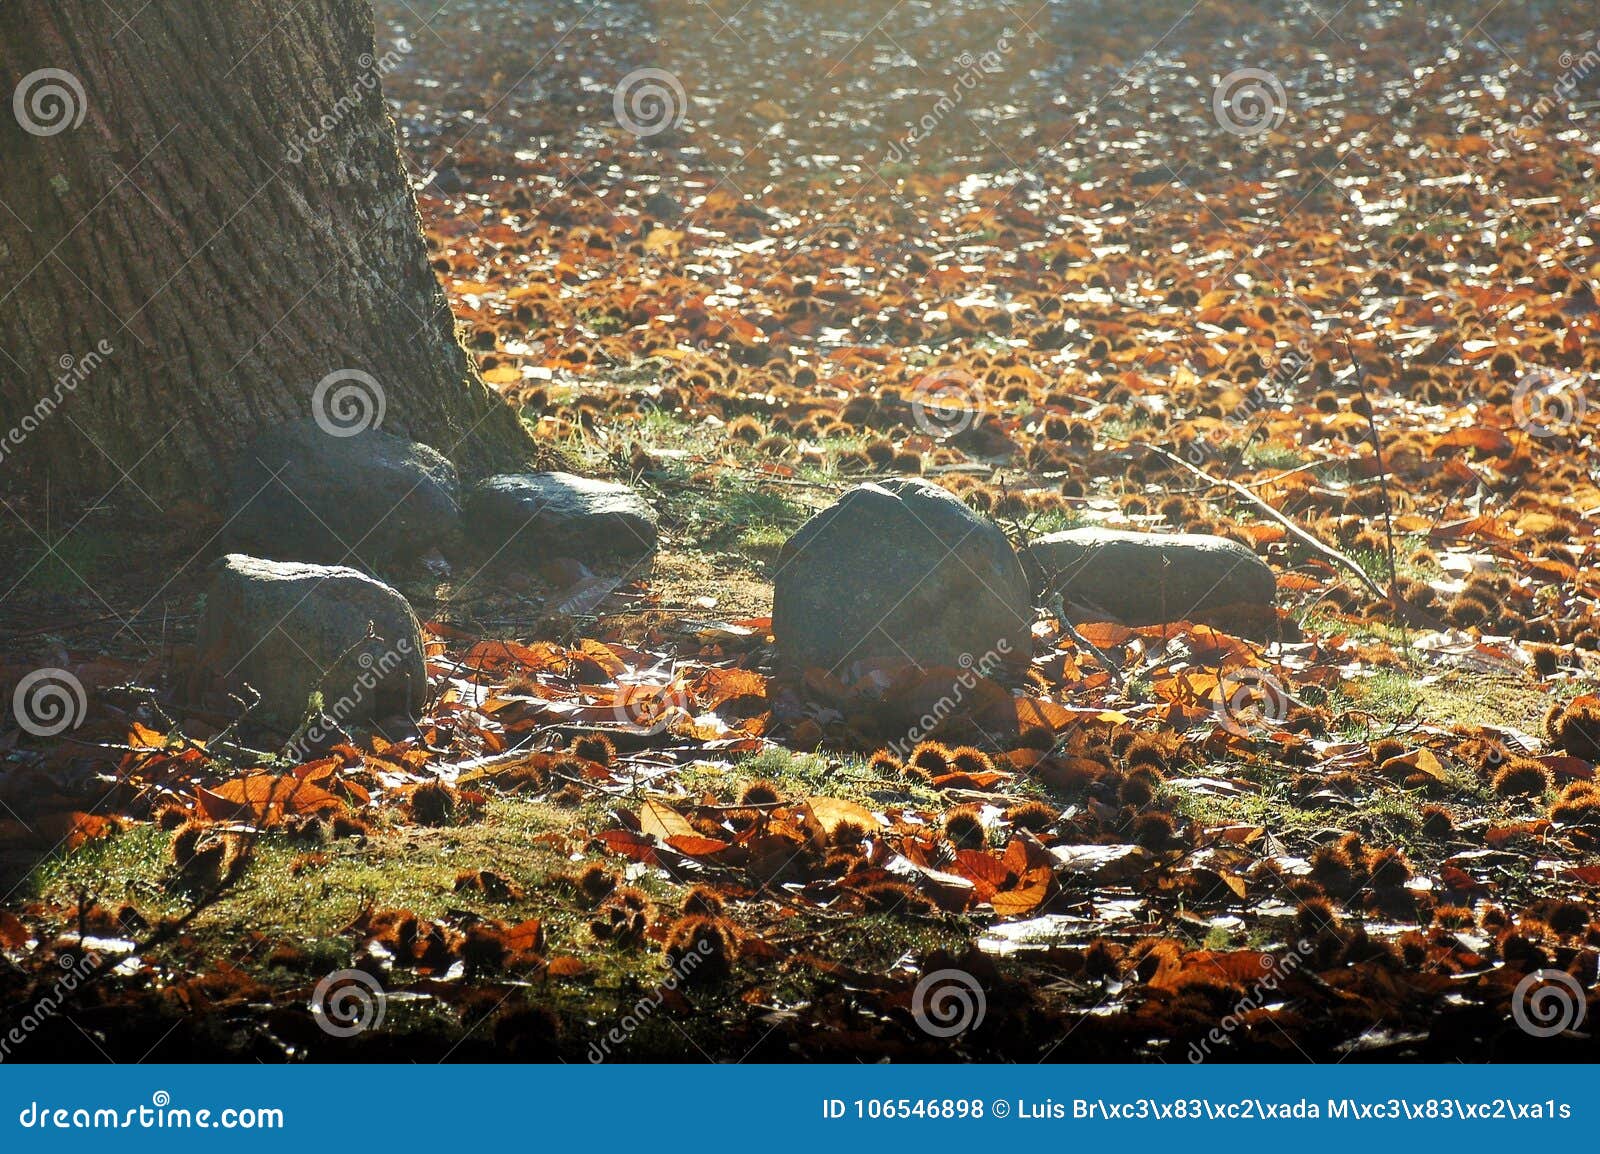 stones, tree, leaves, grass and the sunlight in the forest